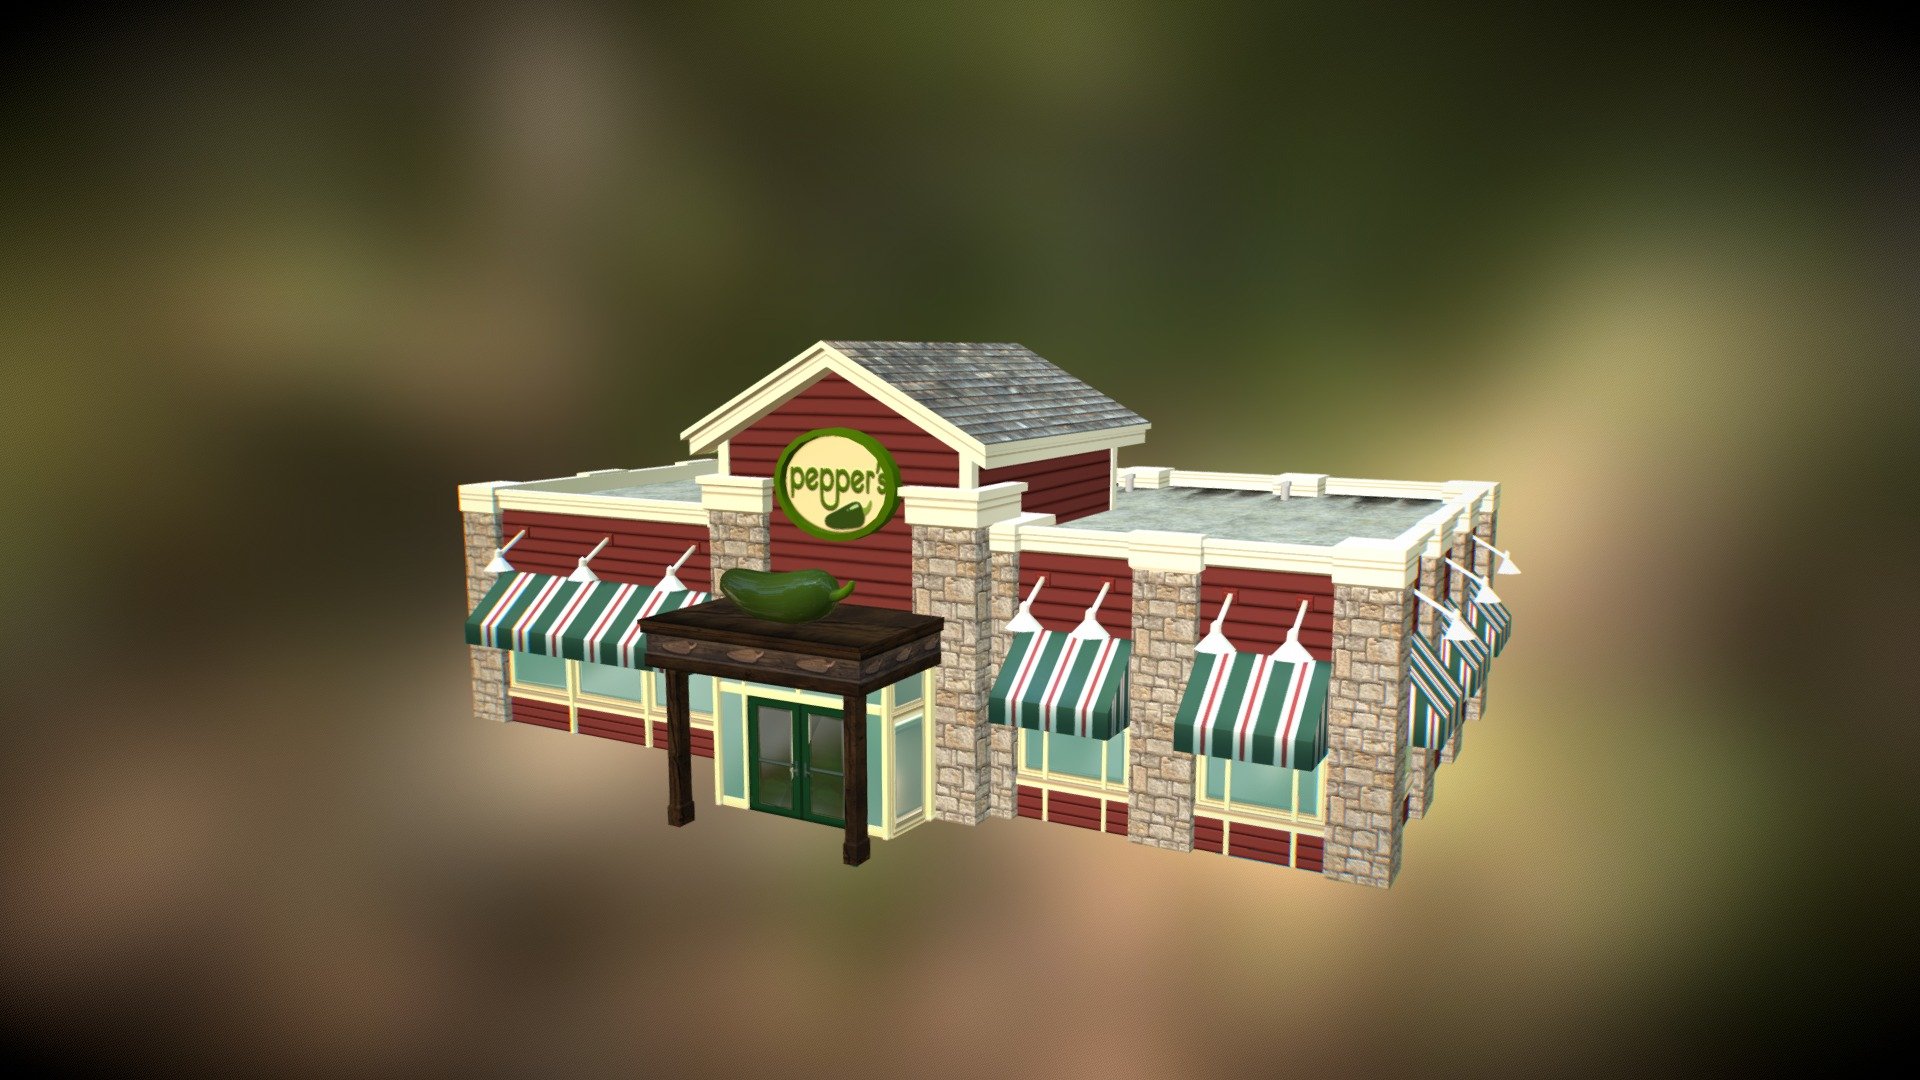 Pepper's inspired by Chili's. Modeled for Cities: Skylines 3d model